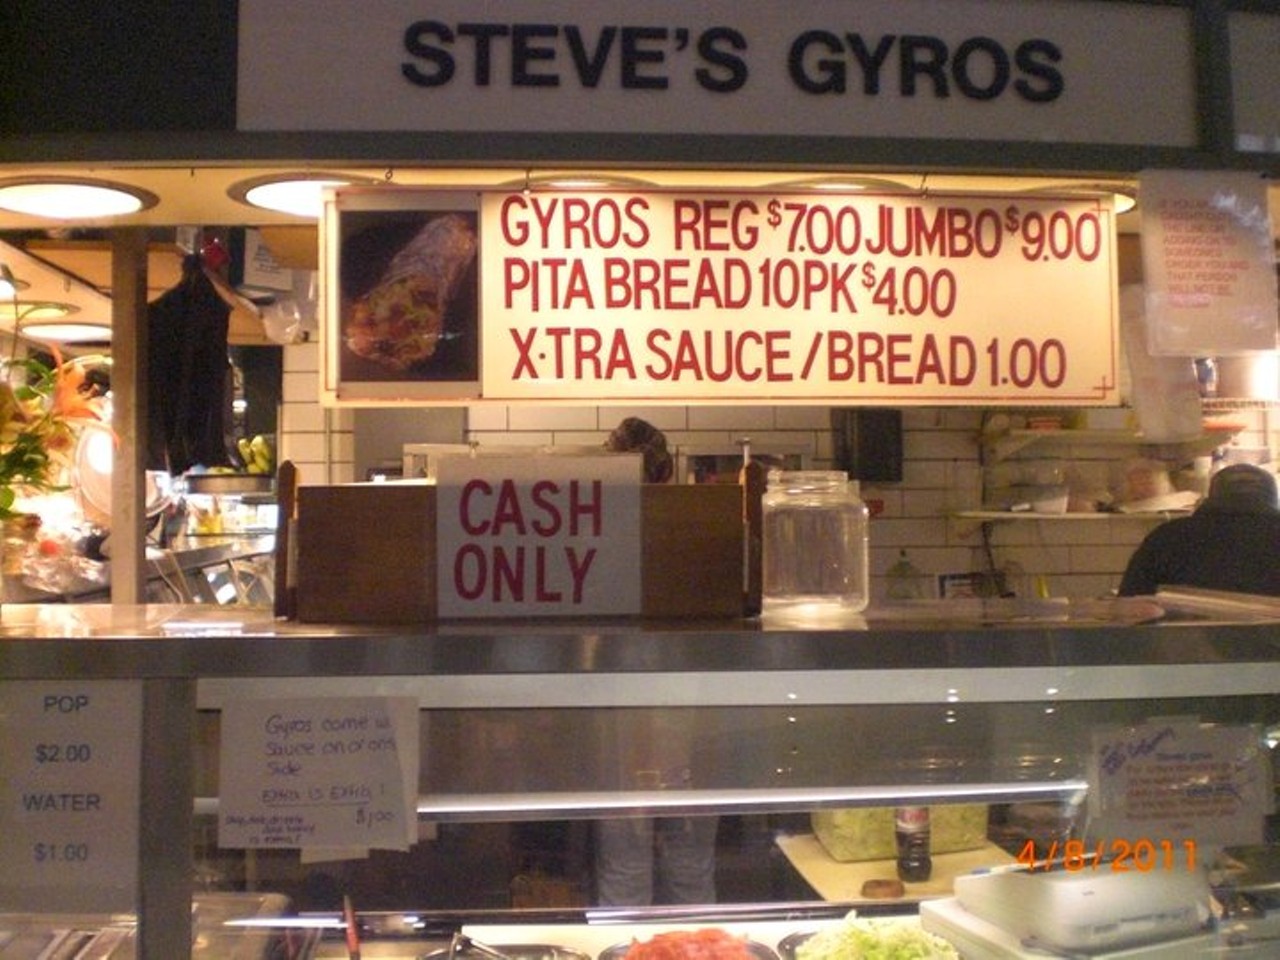 This is the Graceland for gyros in Northeast Ohio. Located inside the West Side Market, fans line up early and wait patiently for these delicious pita beauties. The secret is in the sauce. Steve's Gyro is located at 1979 W 25th St,  Cleveland.